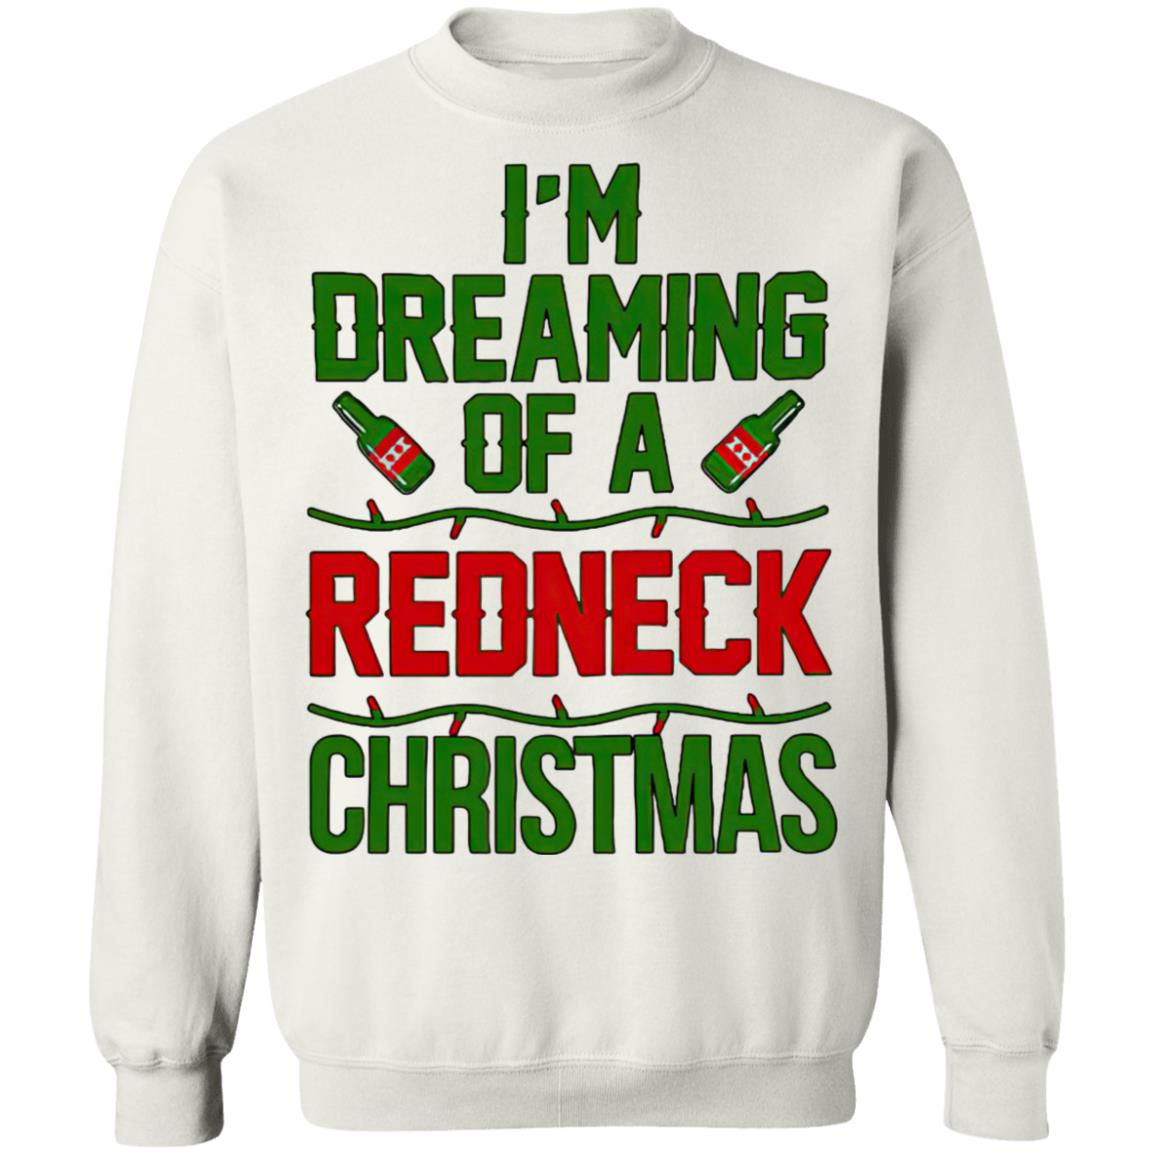 carlos leos recommends redneck christmas sweater pic